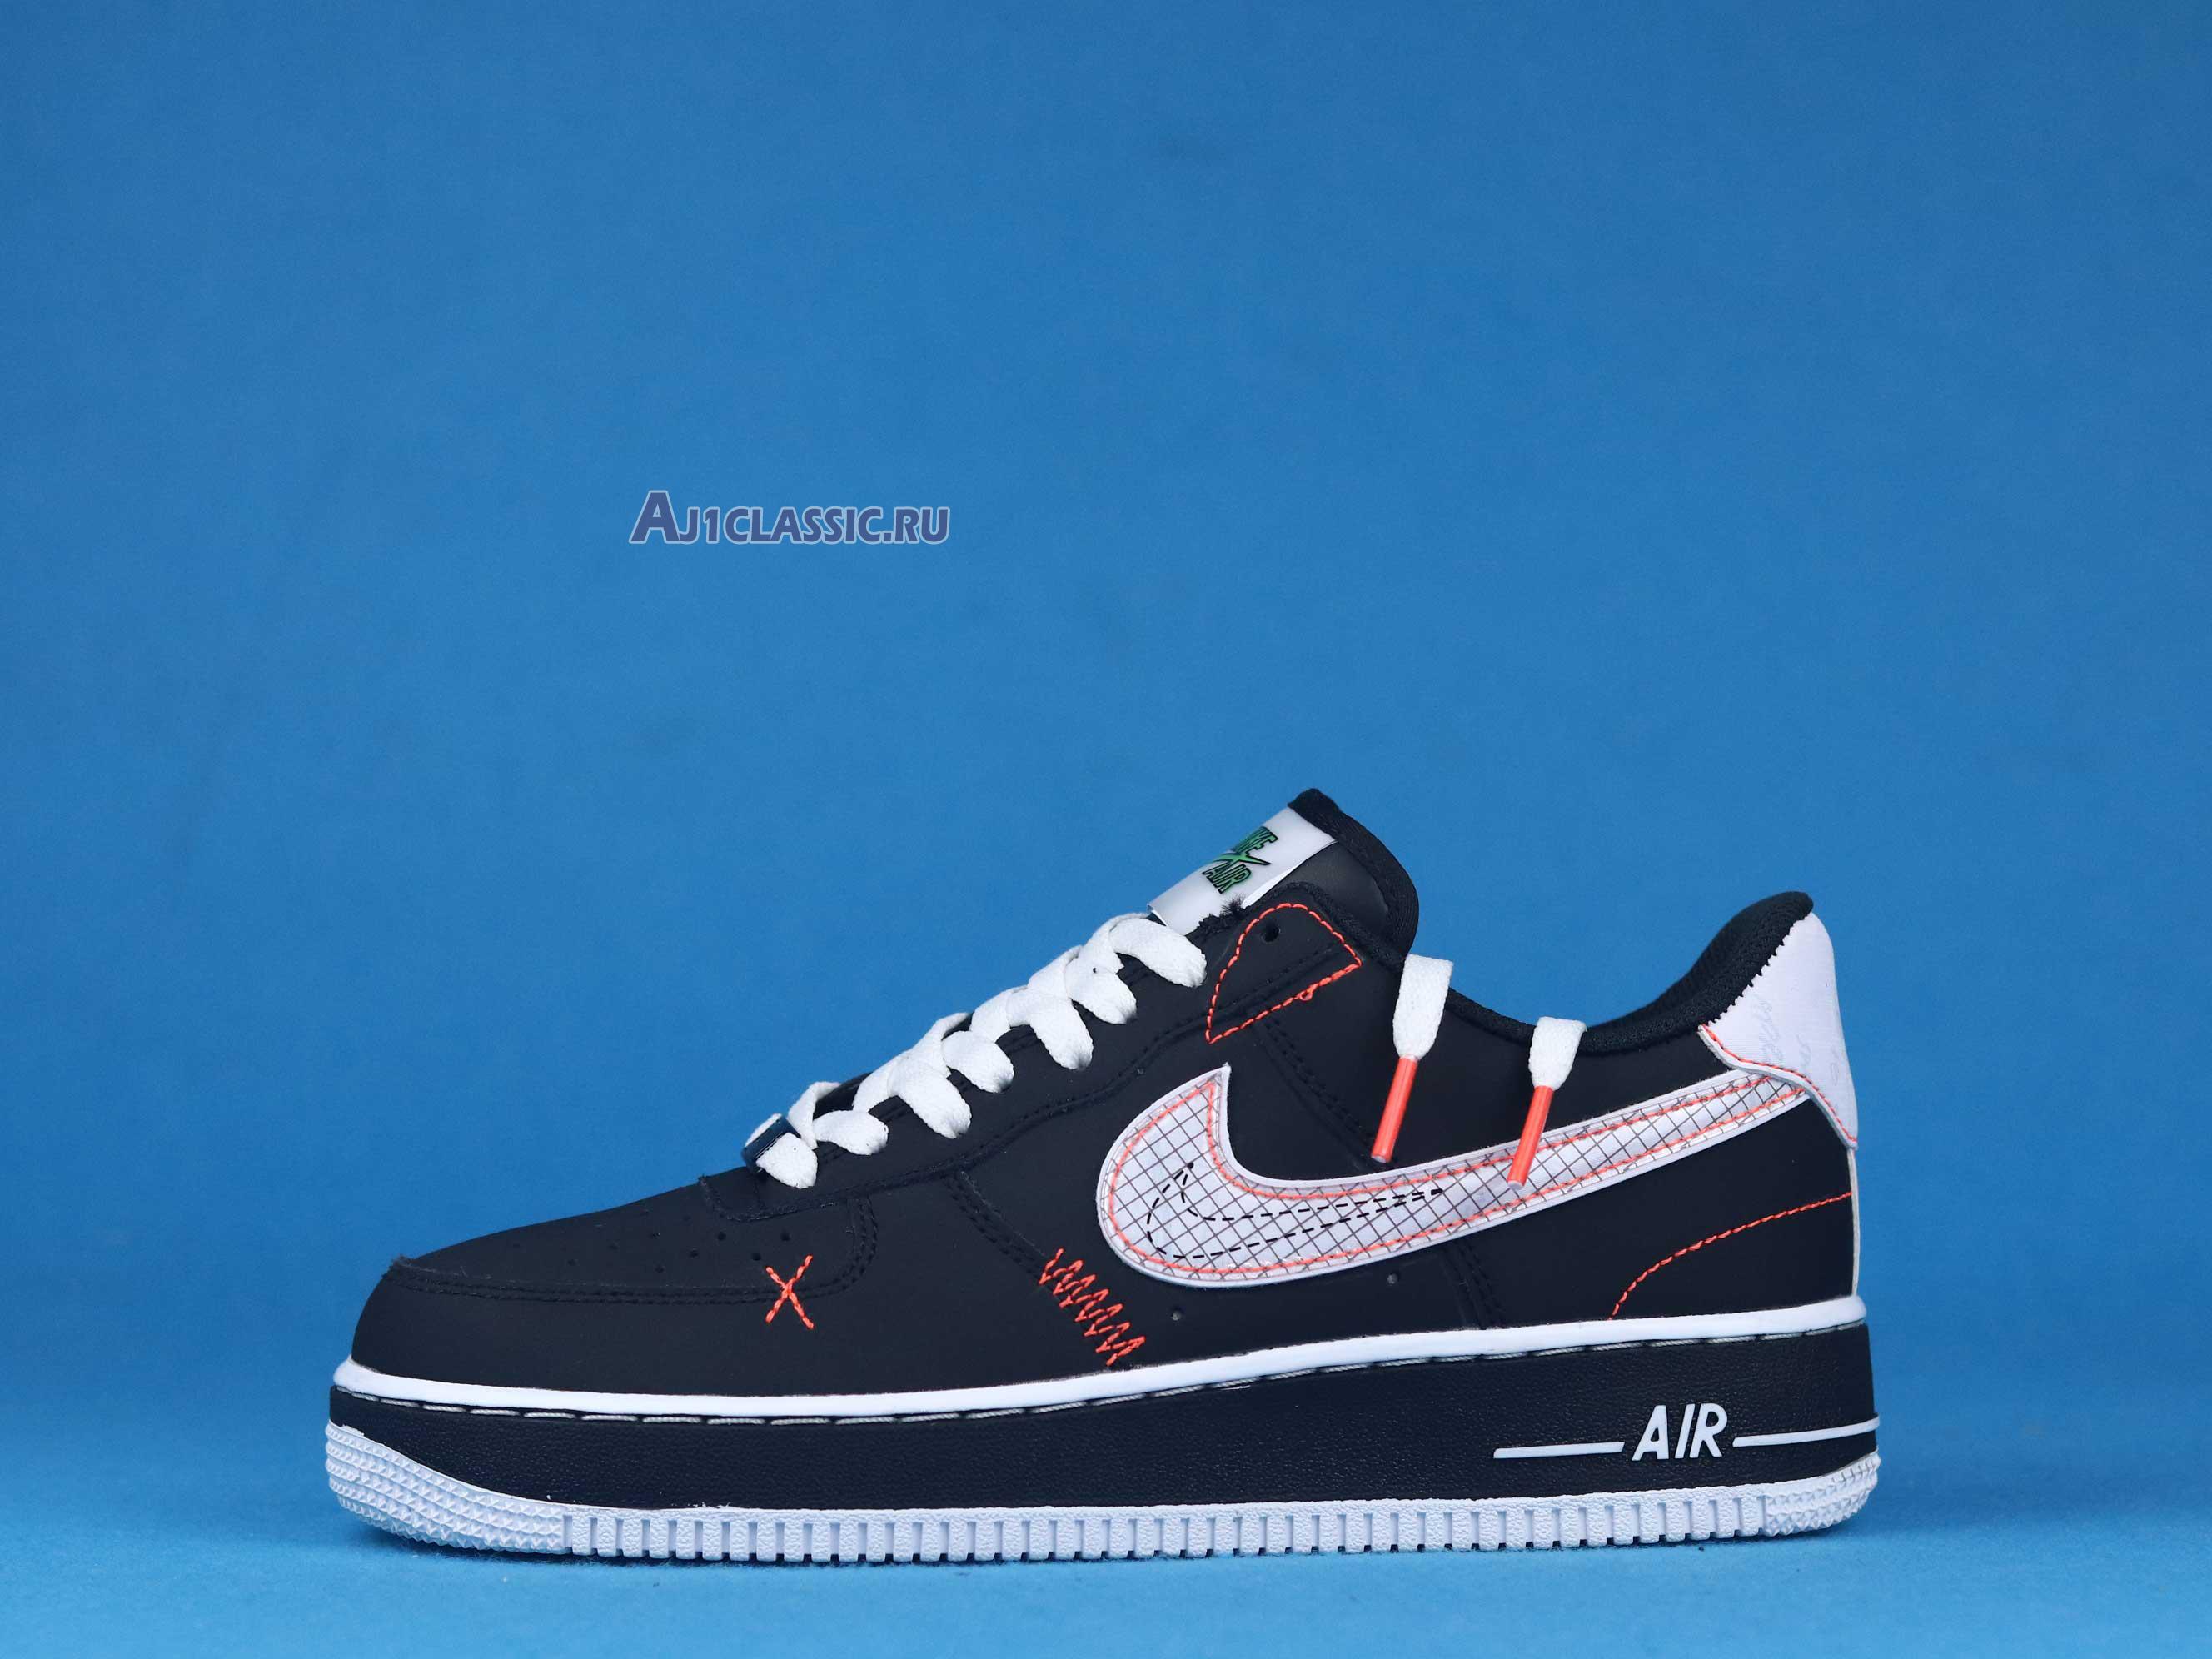 Nike Air Force 1 Low 07 LV8 "Exposed Stitching" CU6646-001